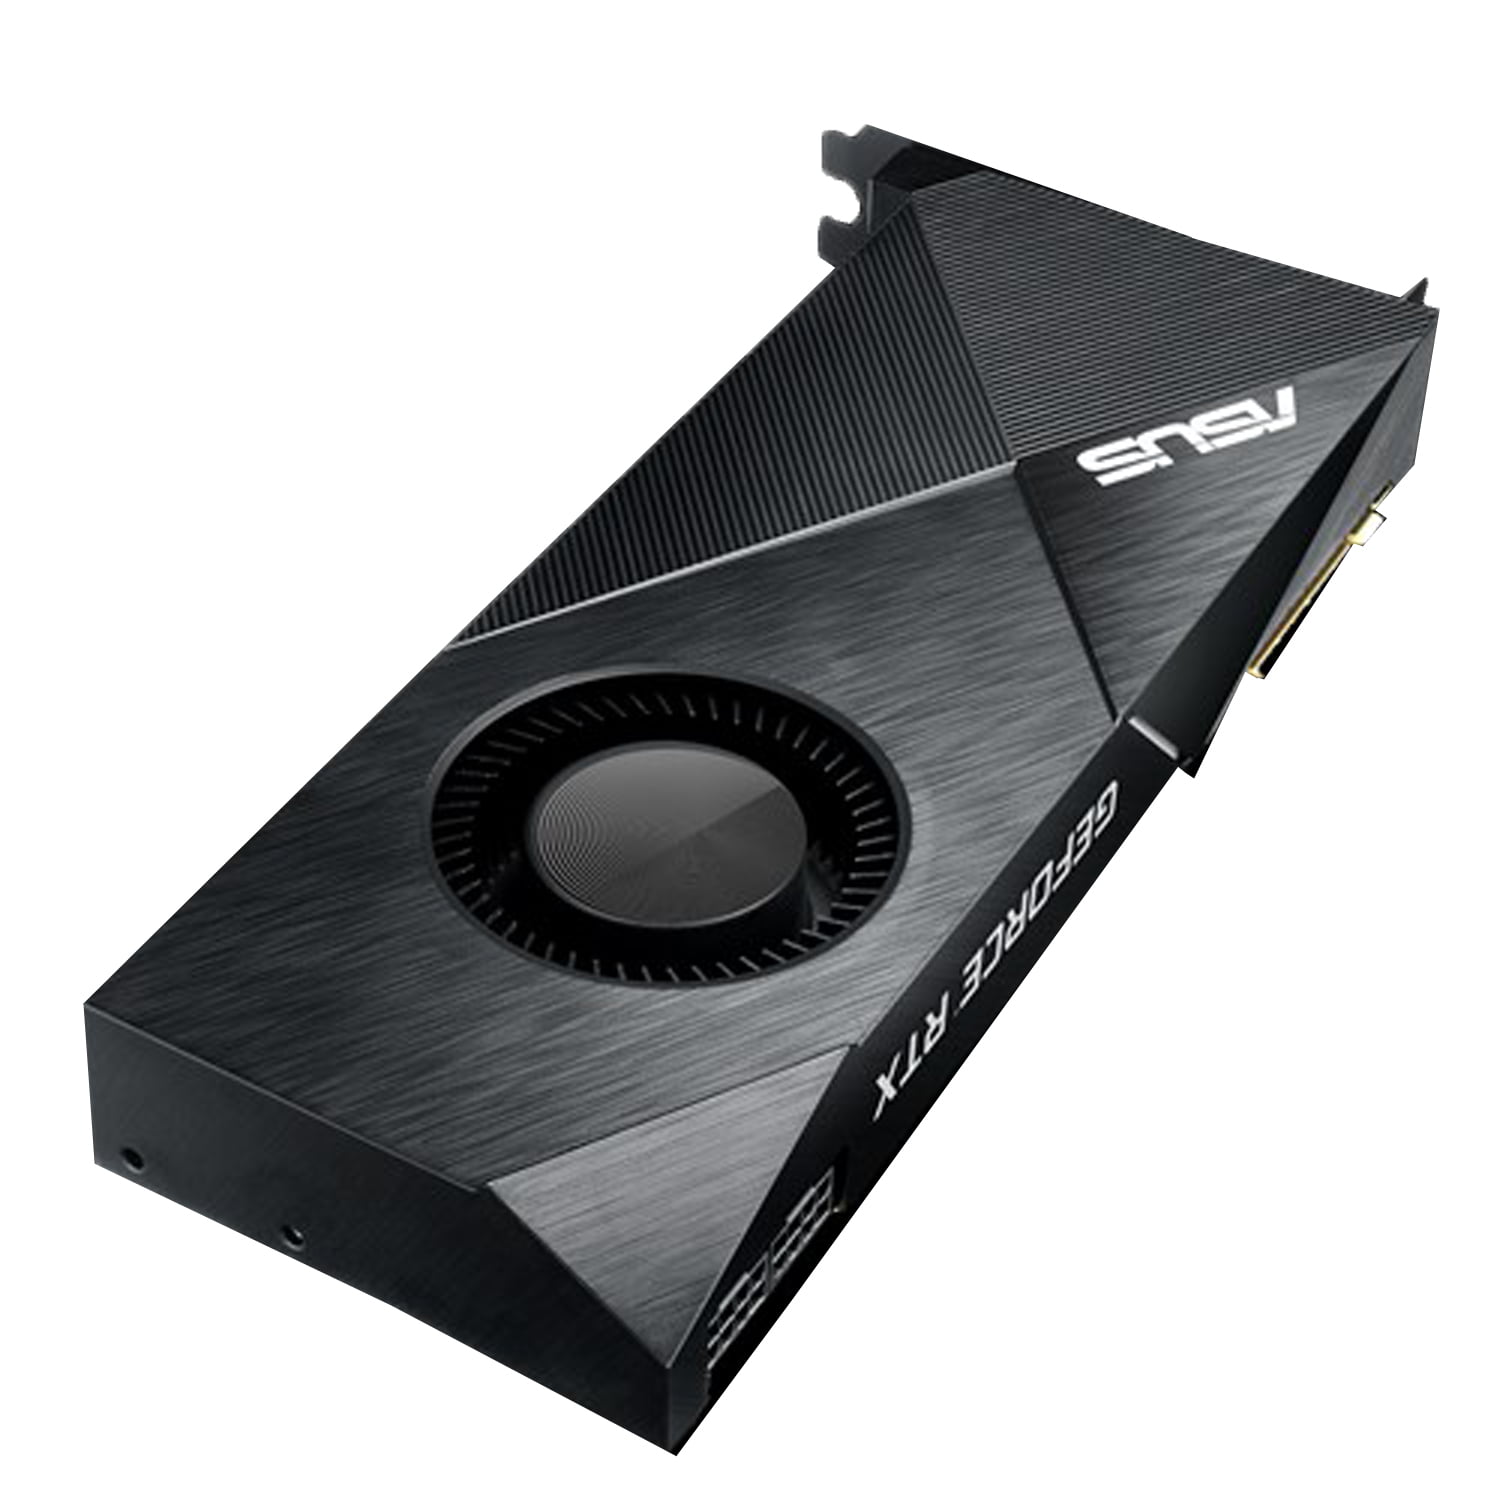 pille Gammel mand pant Asus TURBO-RTX2080TI-11G GeForce RTX 2080 Ti Graphic Card - 11 GB GDDR6 -  Dual Slot Space Required - Walmart.com